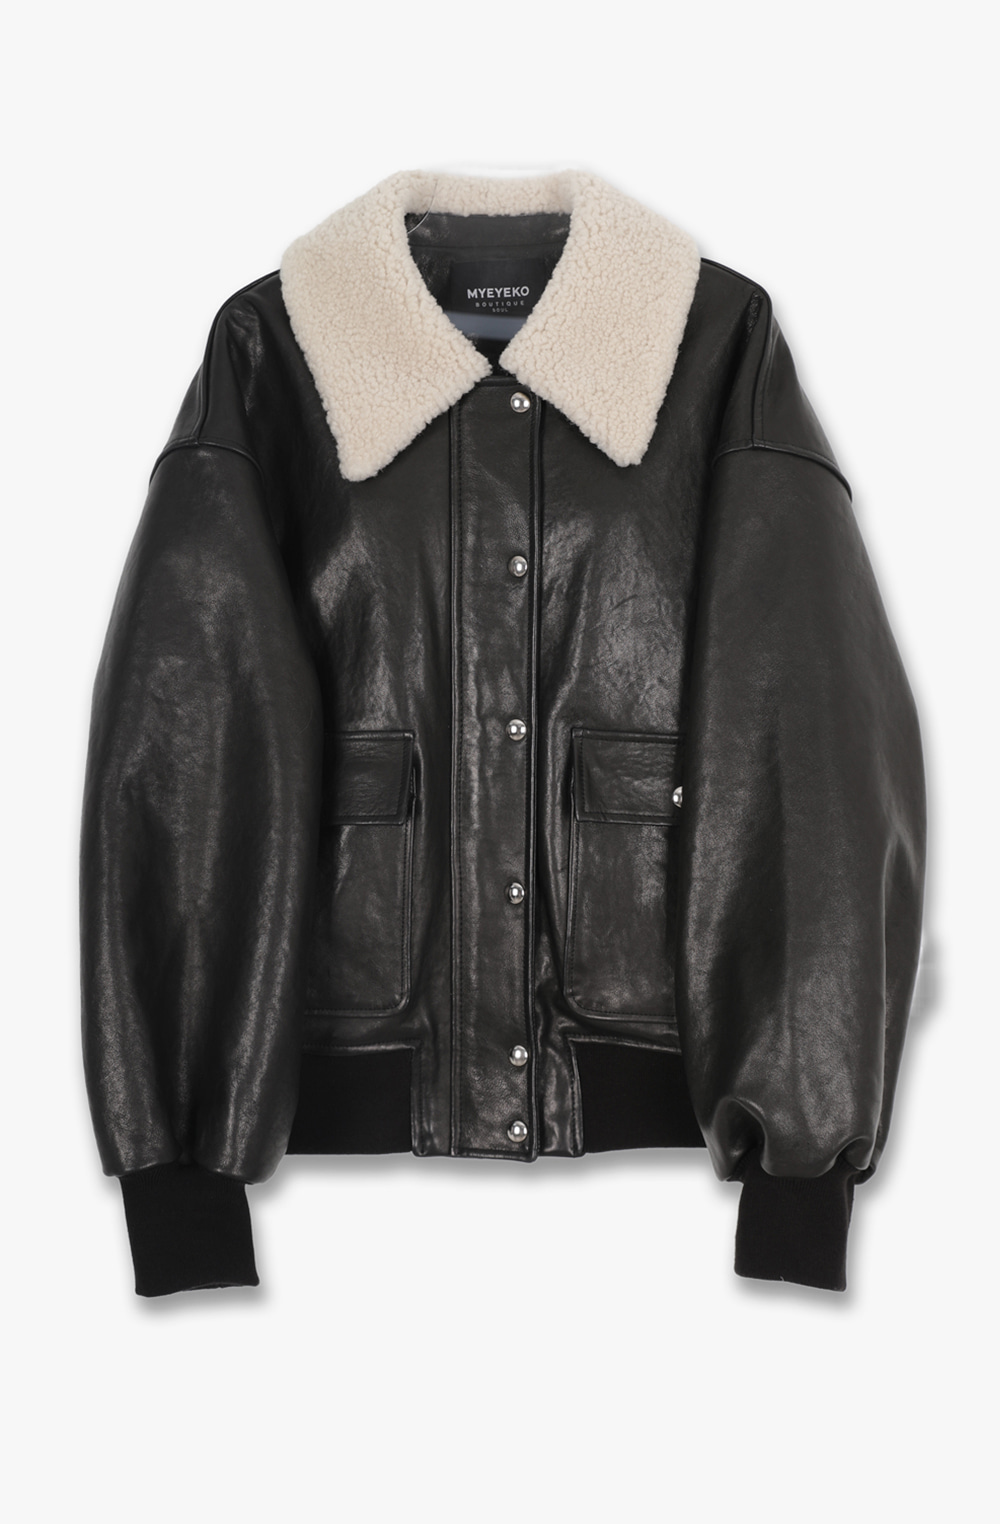 HIGH QUALITY LINE - MYEYEKO 22 Fall/Winter Lamb-Collar LEATHER  JACKET (Vegetable lambskin from ITALY. )